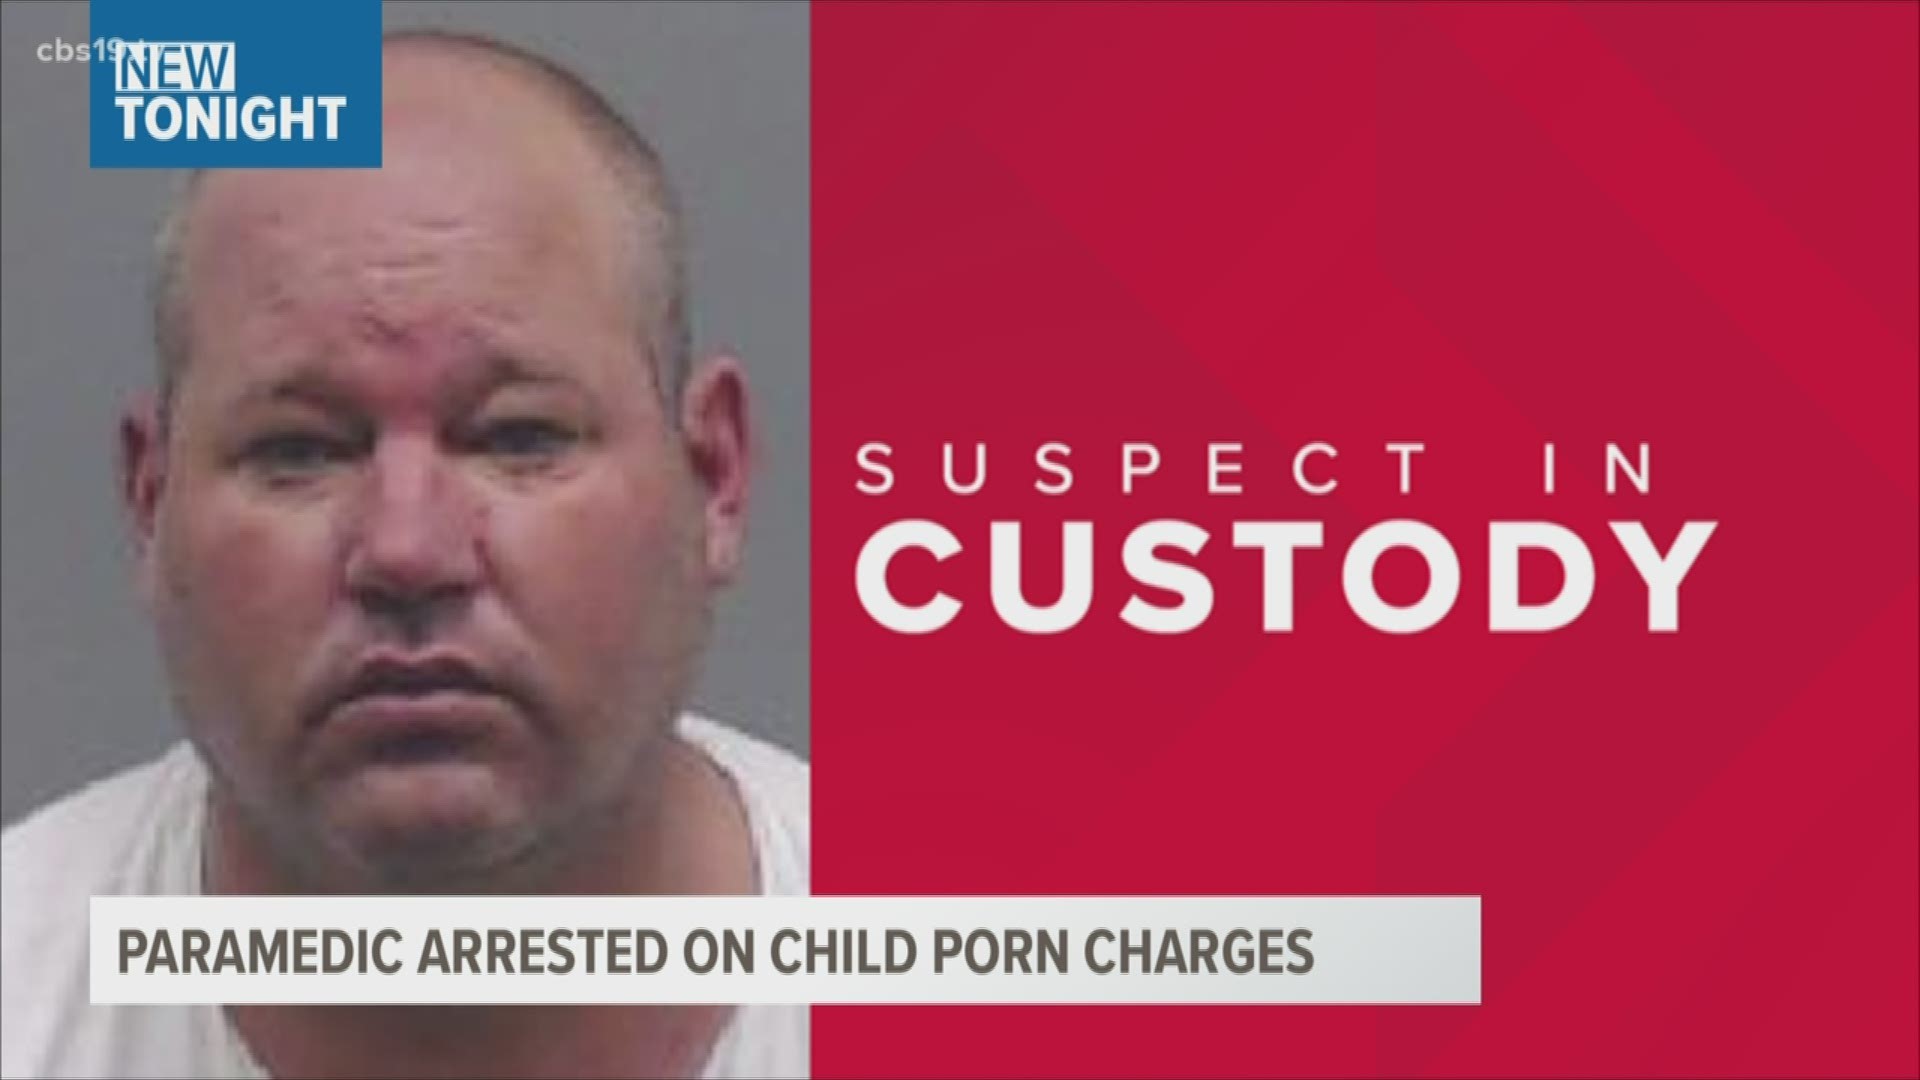 The Smith County Sheriff's Office said the National Center for Missing and Exploited Children gave them a tip which led to the man's arrest.